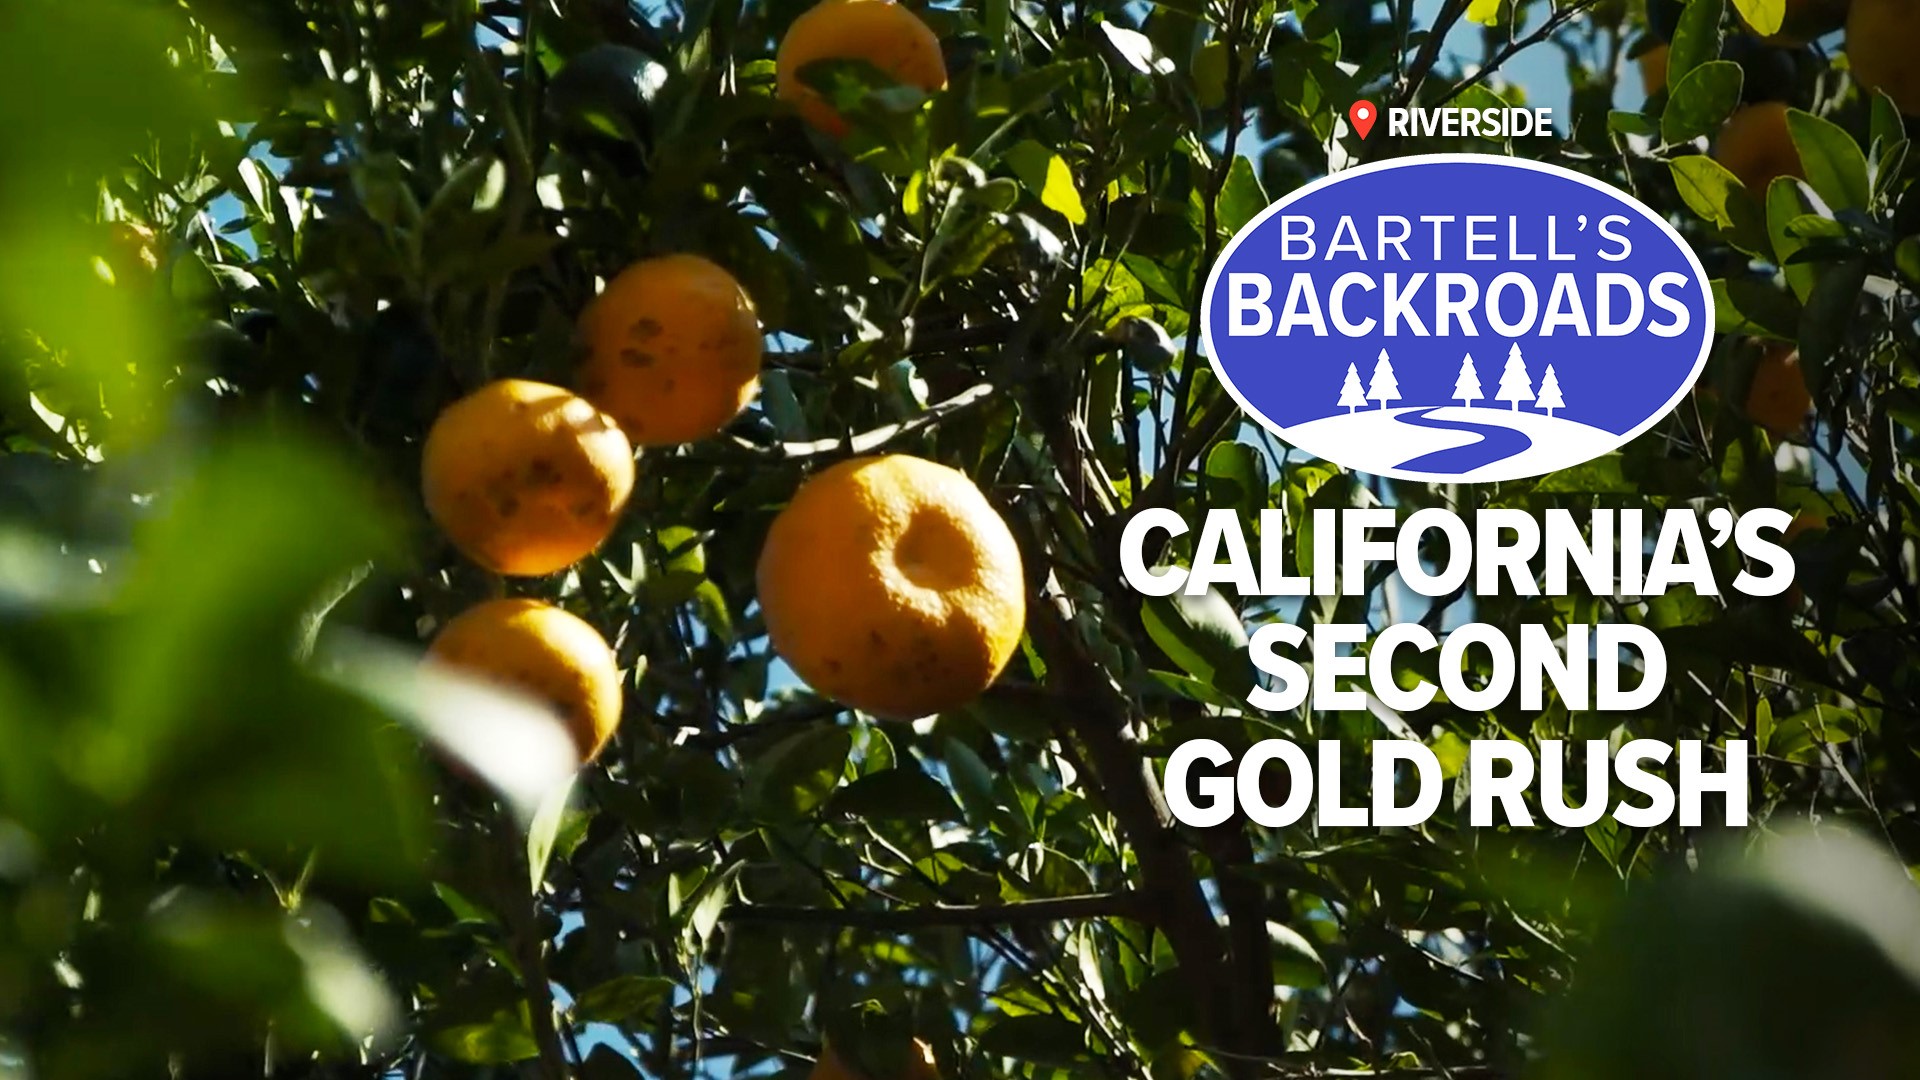 The long history of California’s citrus industry is preserved at the Citrus State Historic Park.